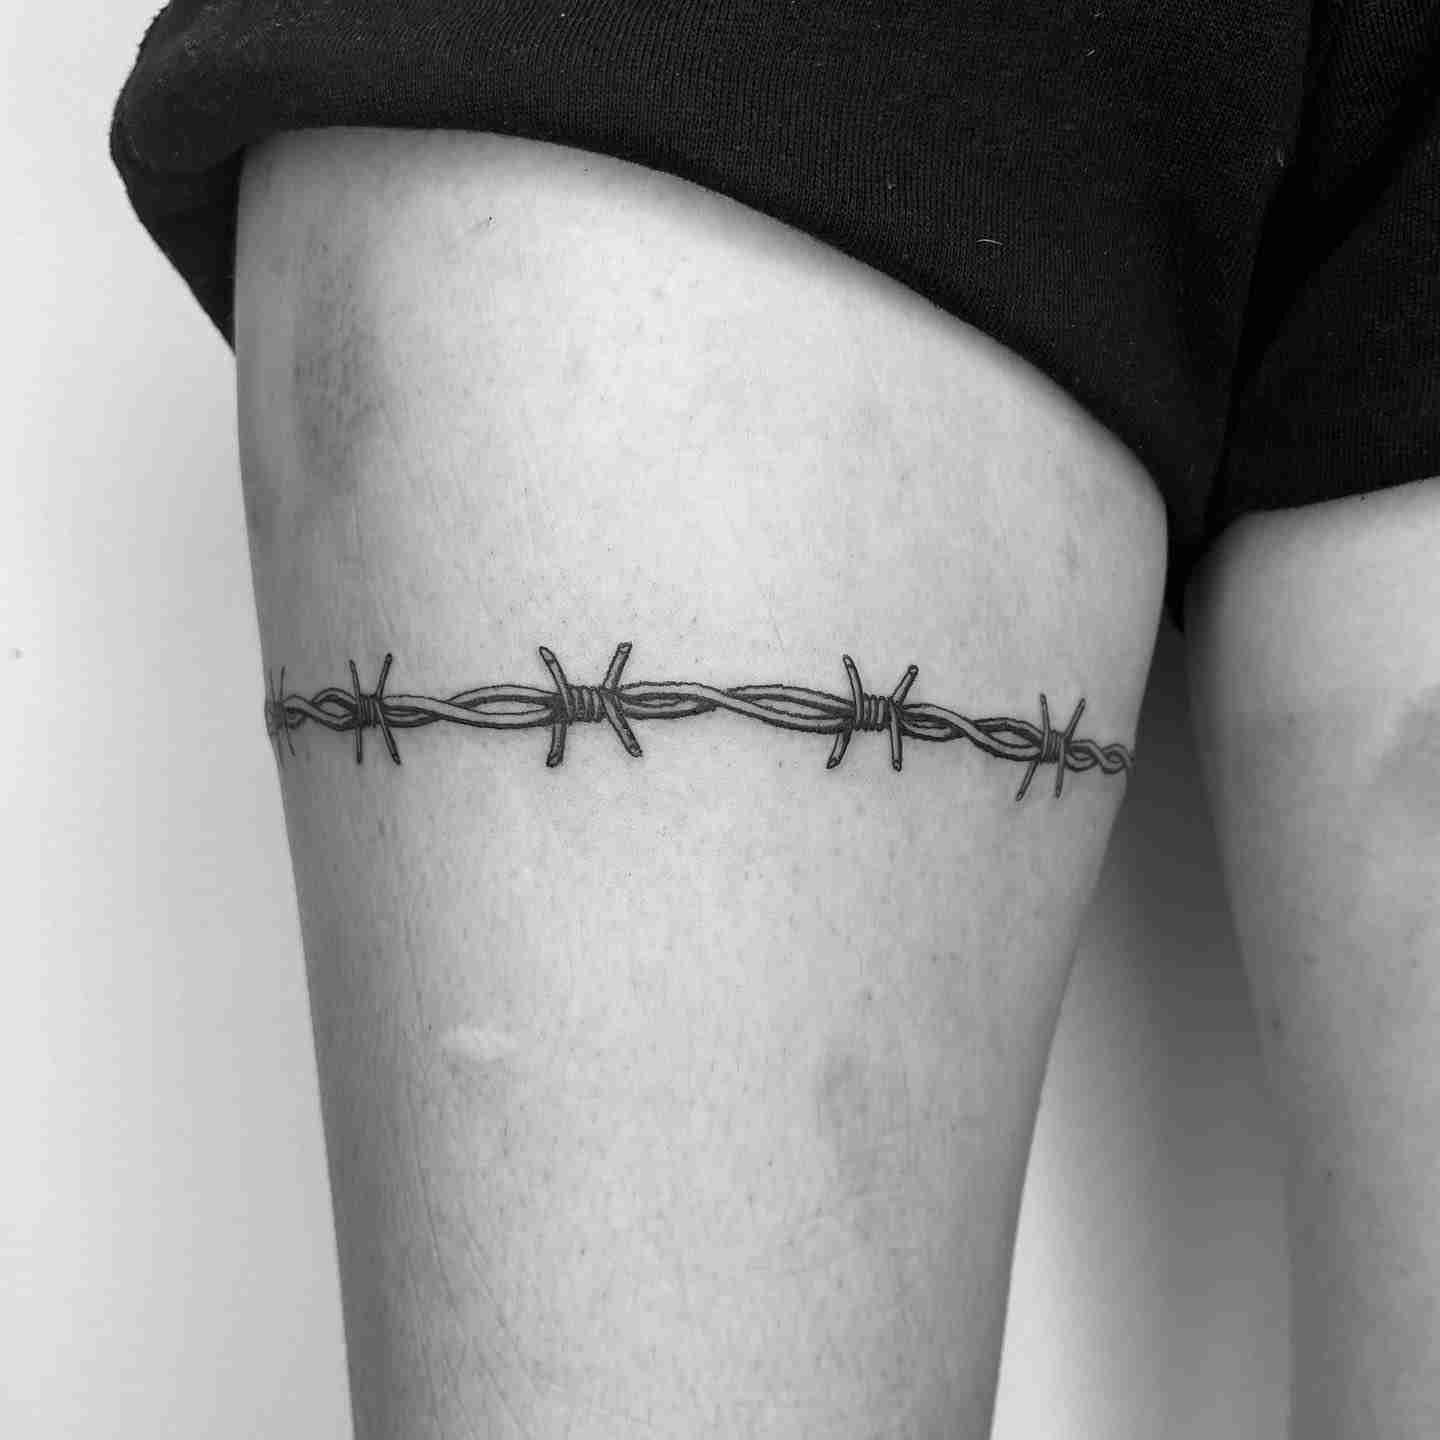 What does a barbed wire tattoo symbolize